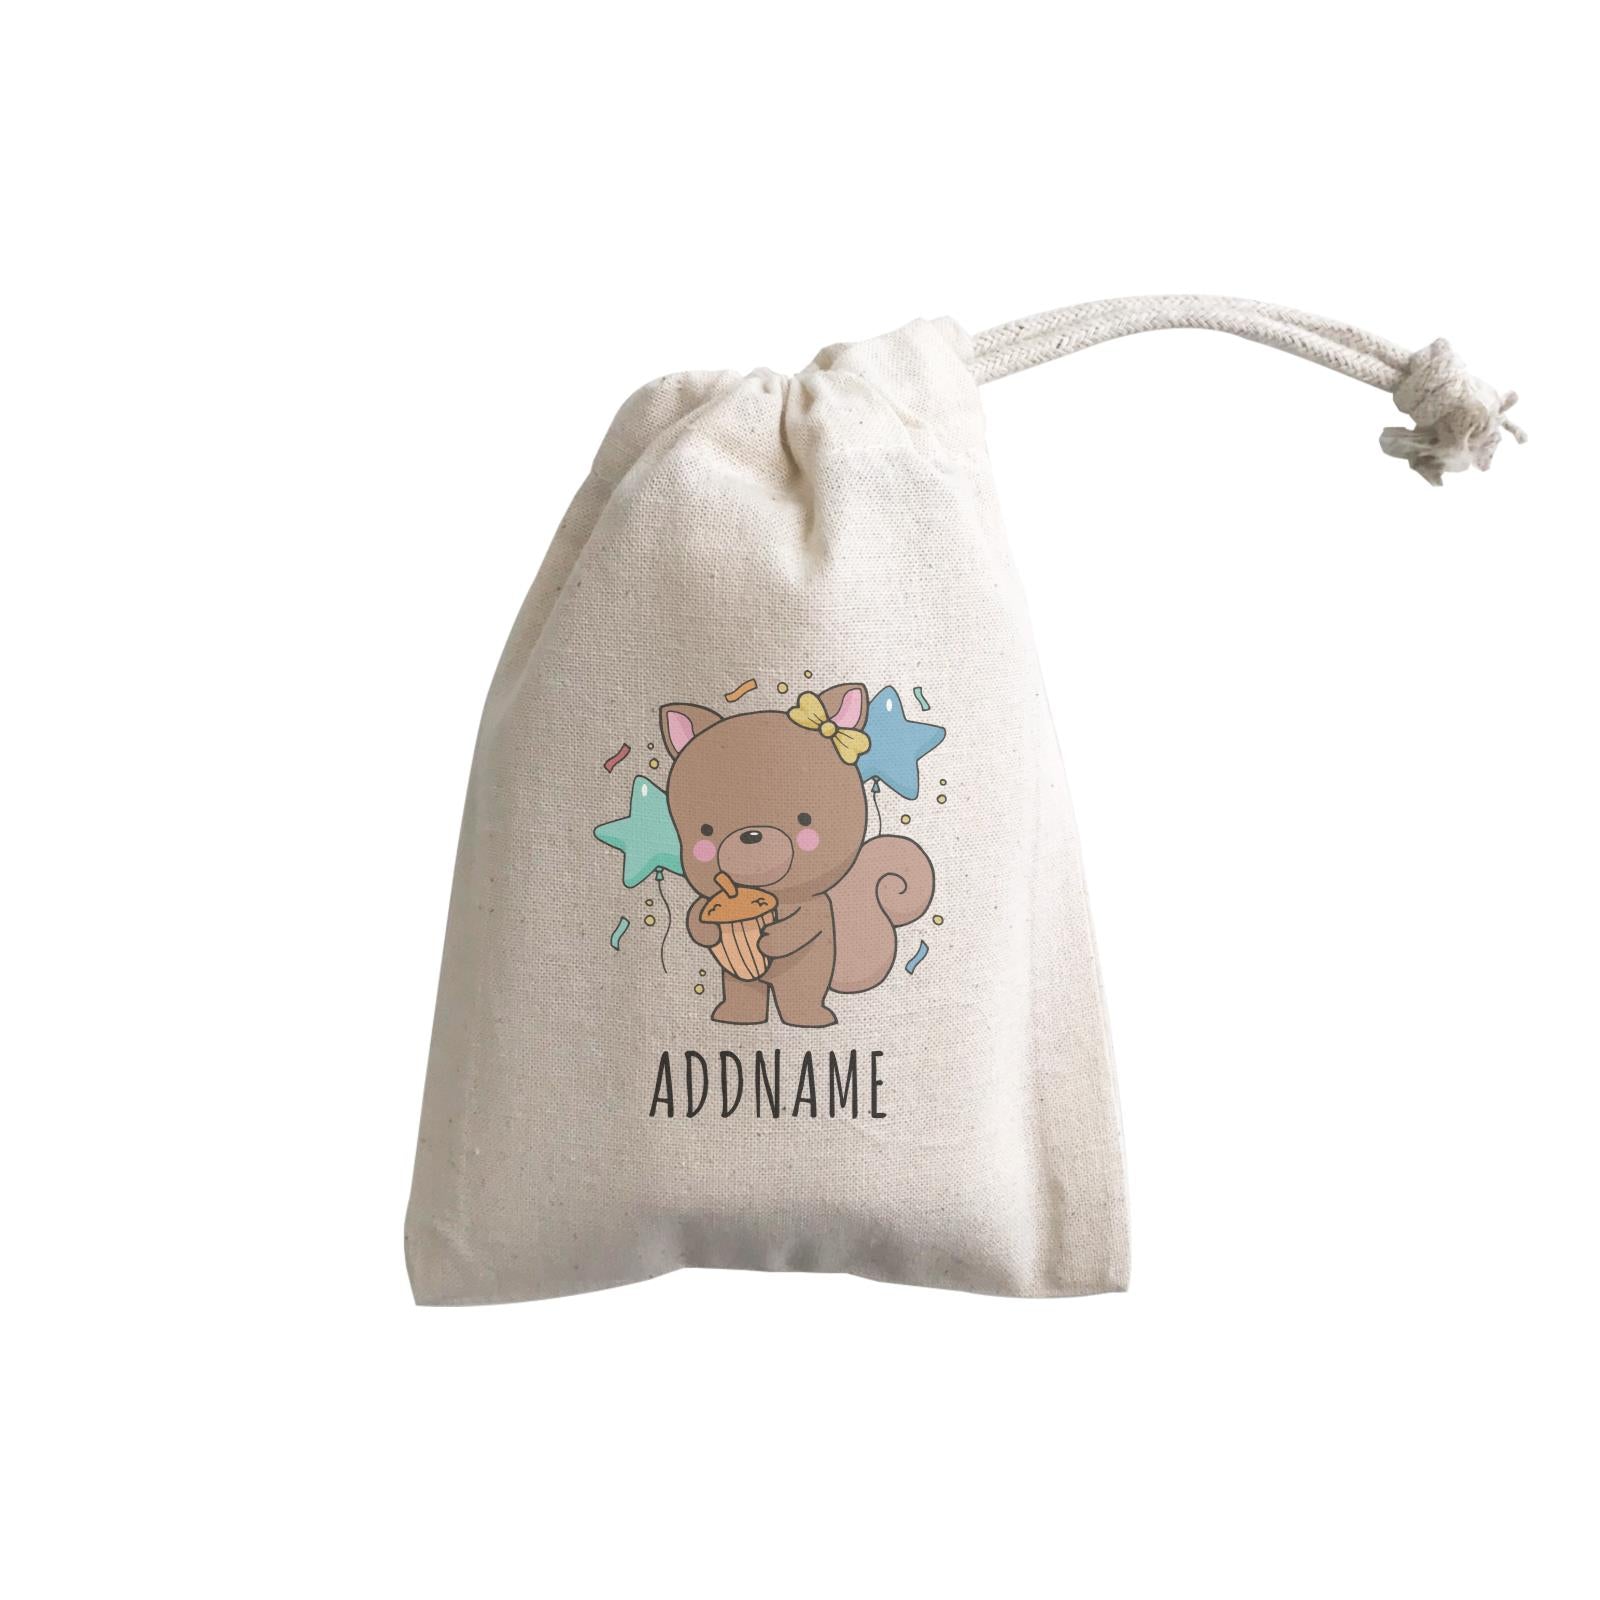 Birthday Sketch Animals Squirrel with Acorn Addname Turns 1 GP Gift Pouch